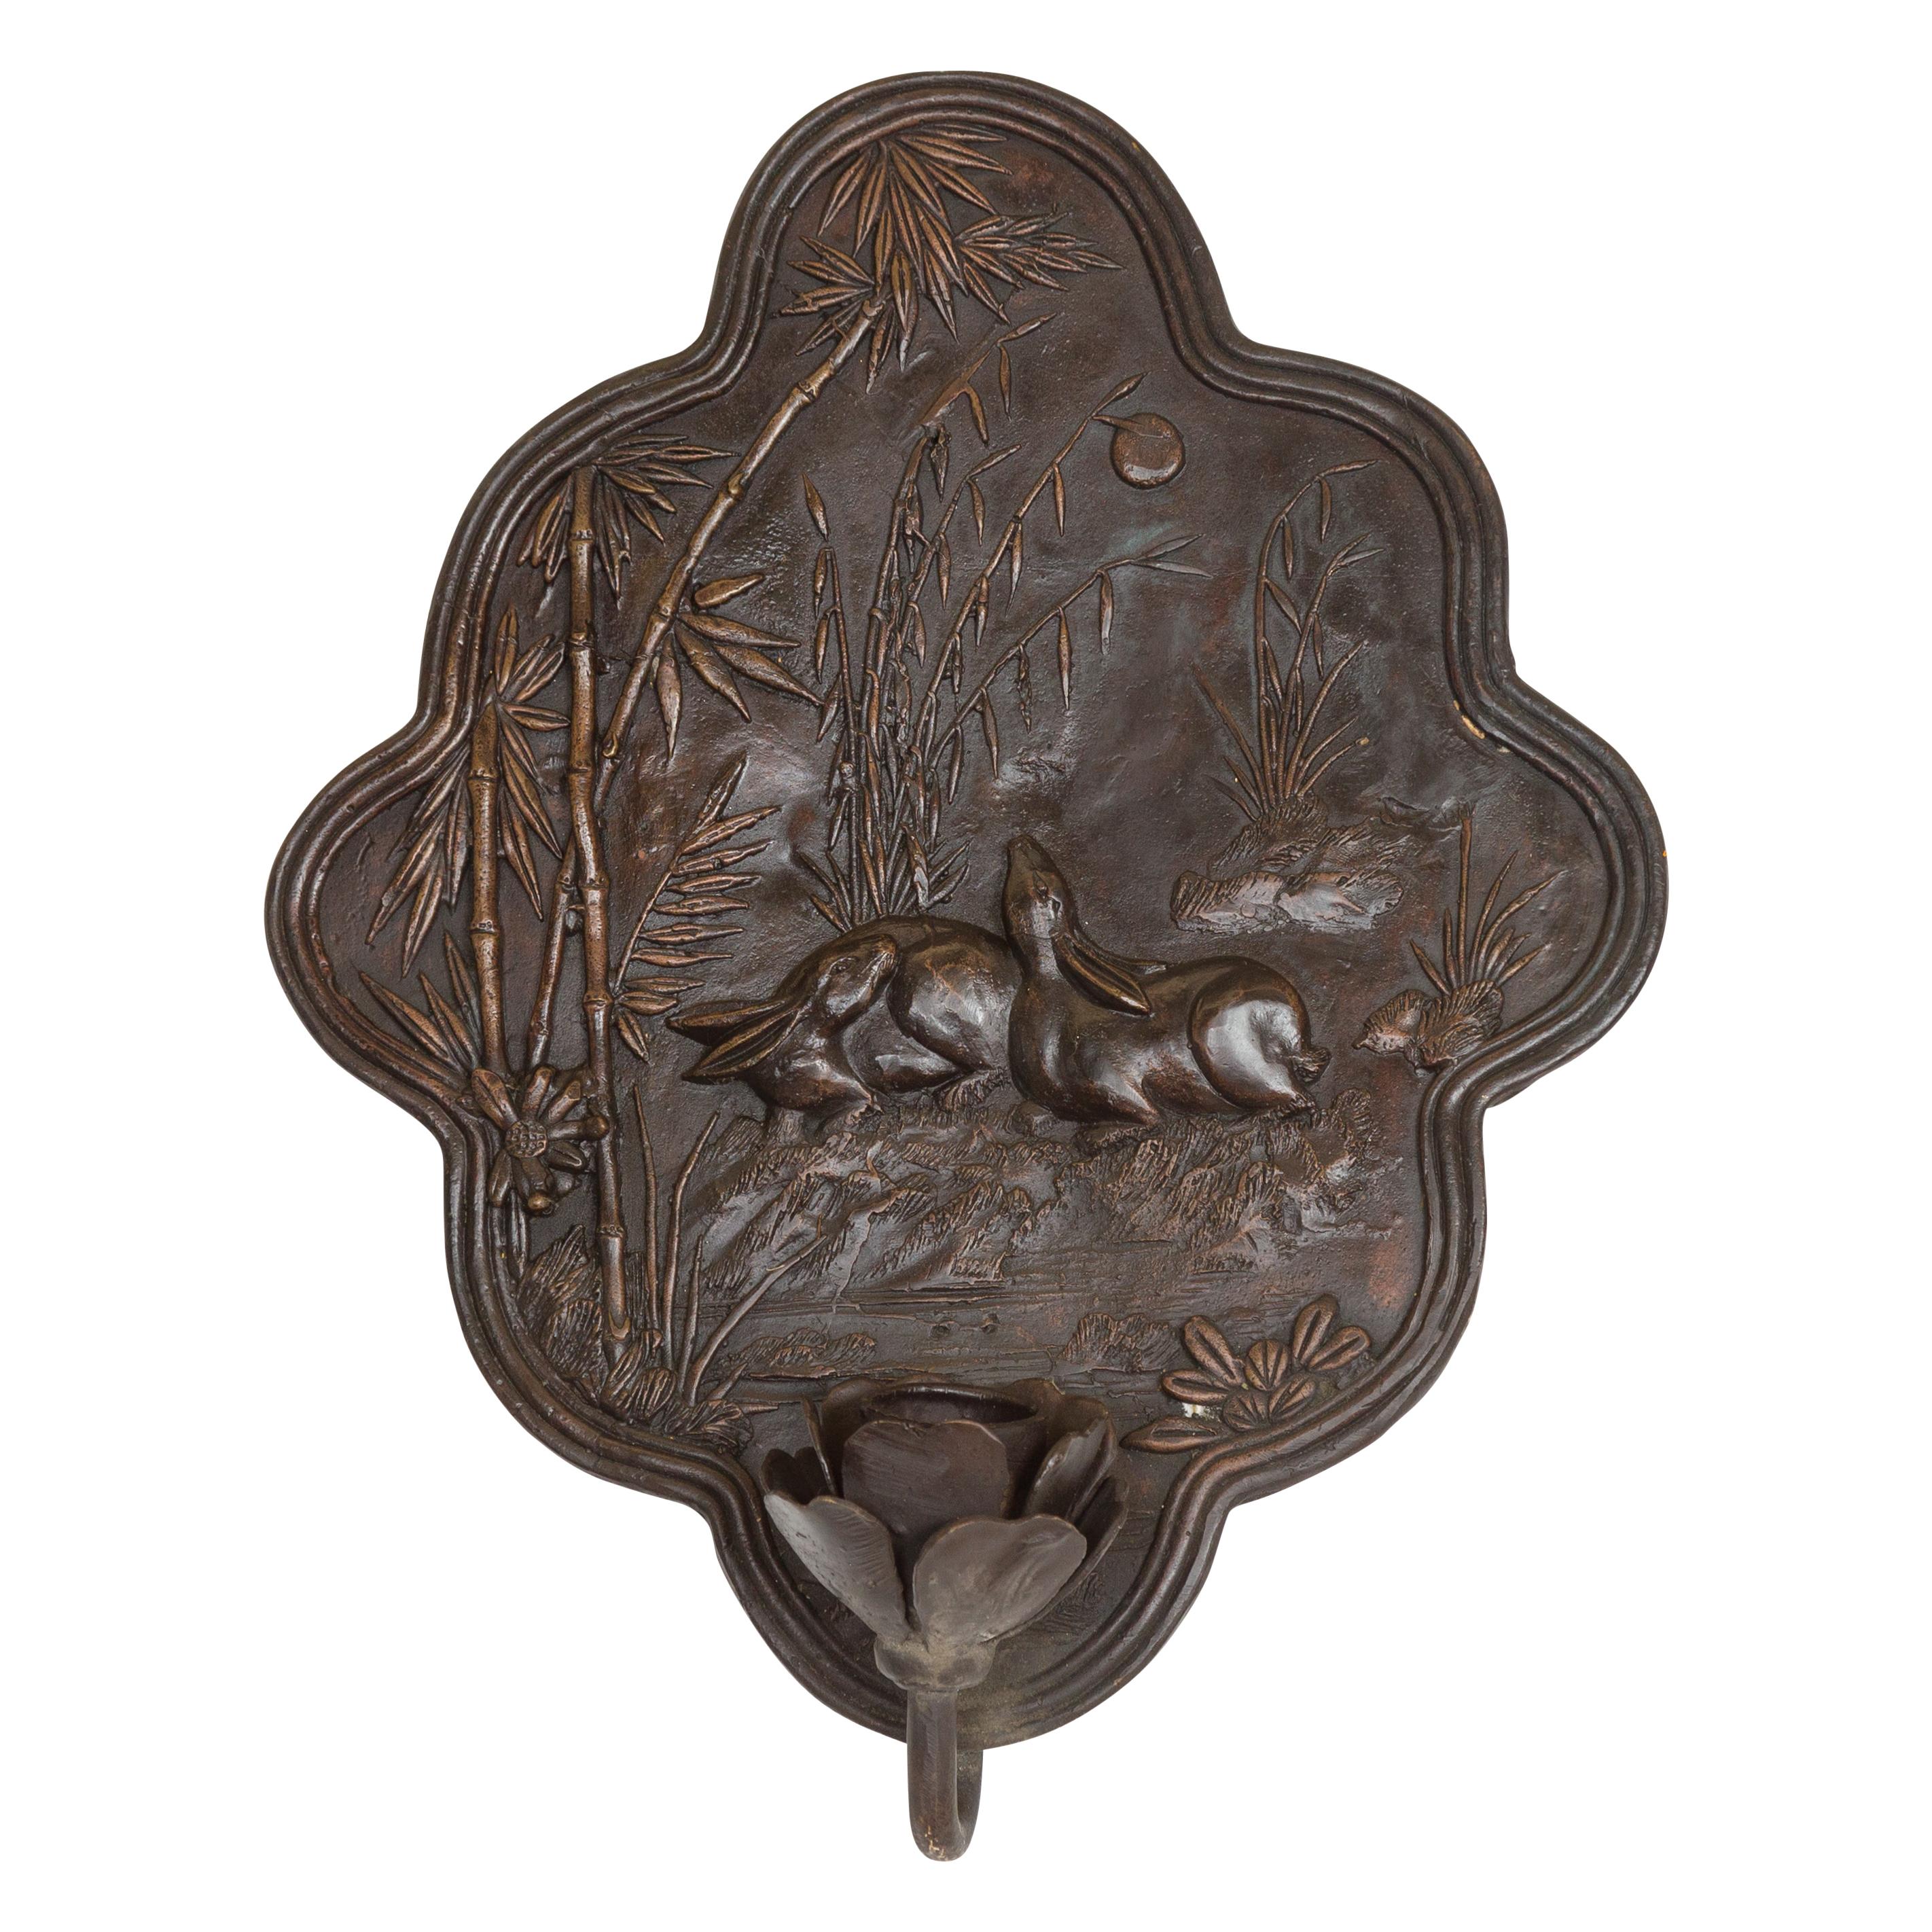 A vintage bronze candle sconce from the mid-20th century, depicting rabbits surrounded by bamboo. Created with the traditional technique of the lost-wax (à la cire perdue) that allows a great precision and finesse in the details, this wall sconce